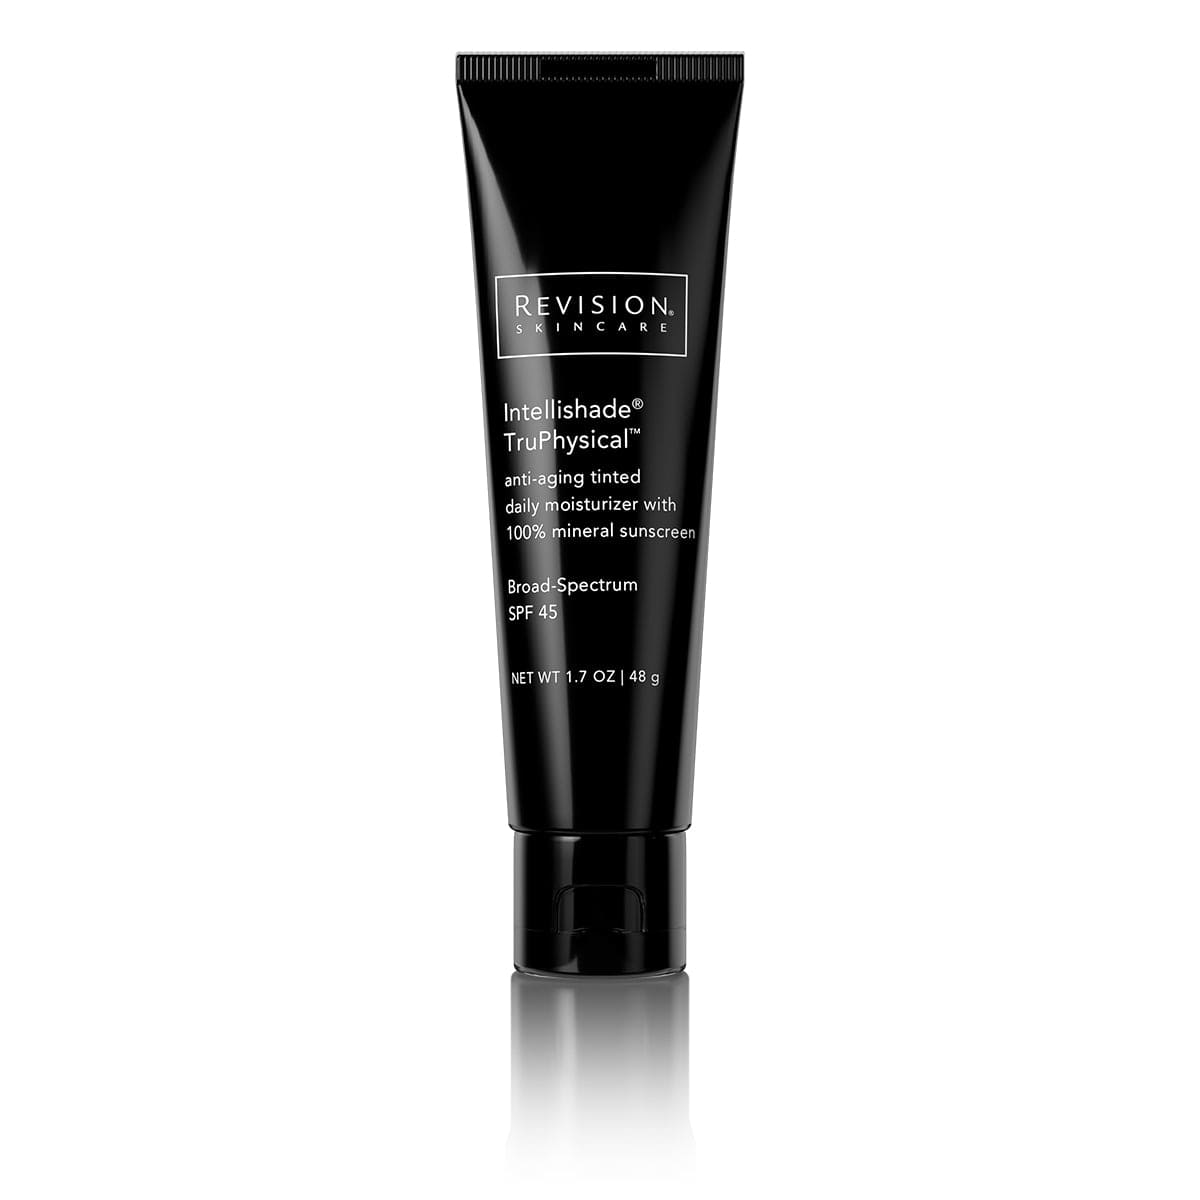 Intellishade TruPhysical- Age-defying tinted daily moisturizer with 100% mineral sunscreen. Tube Front